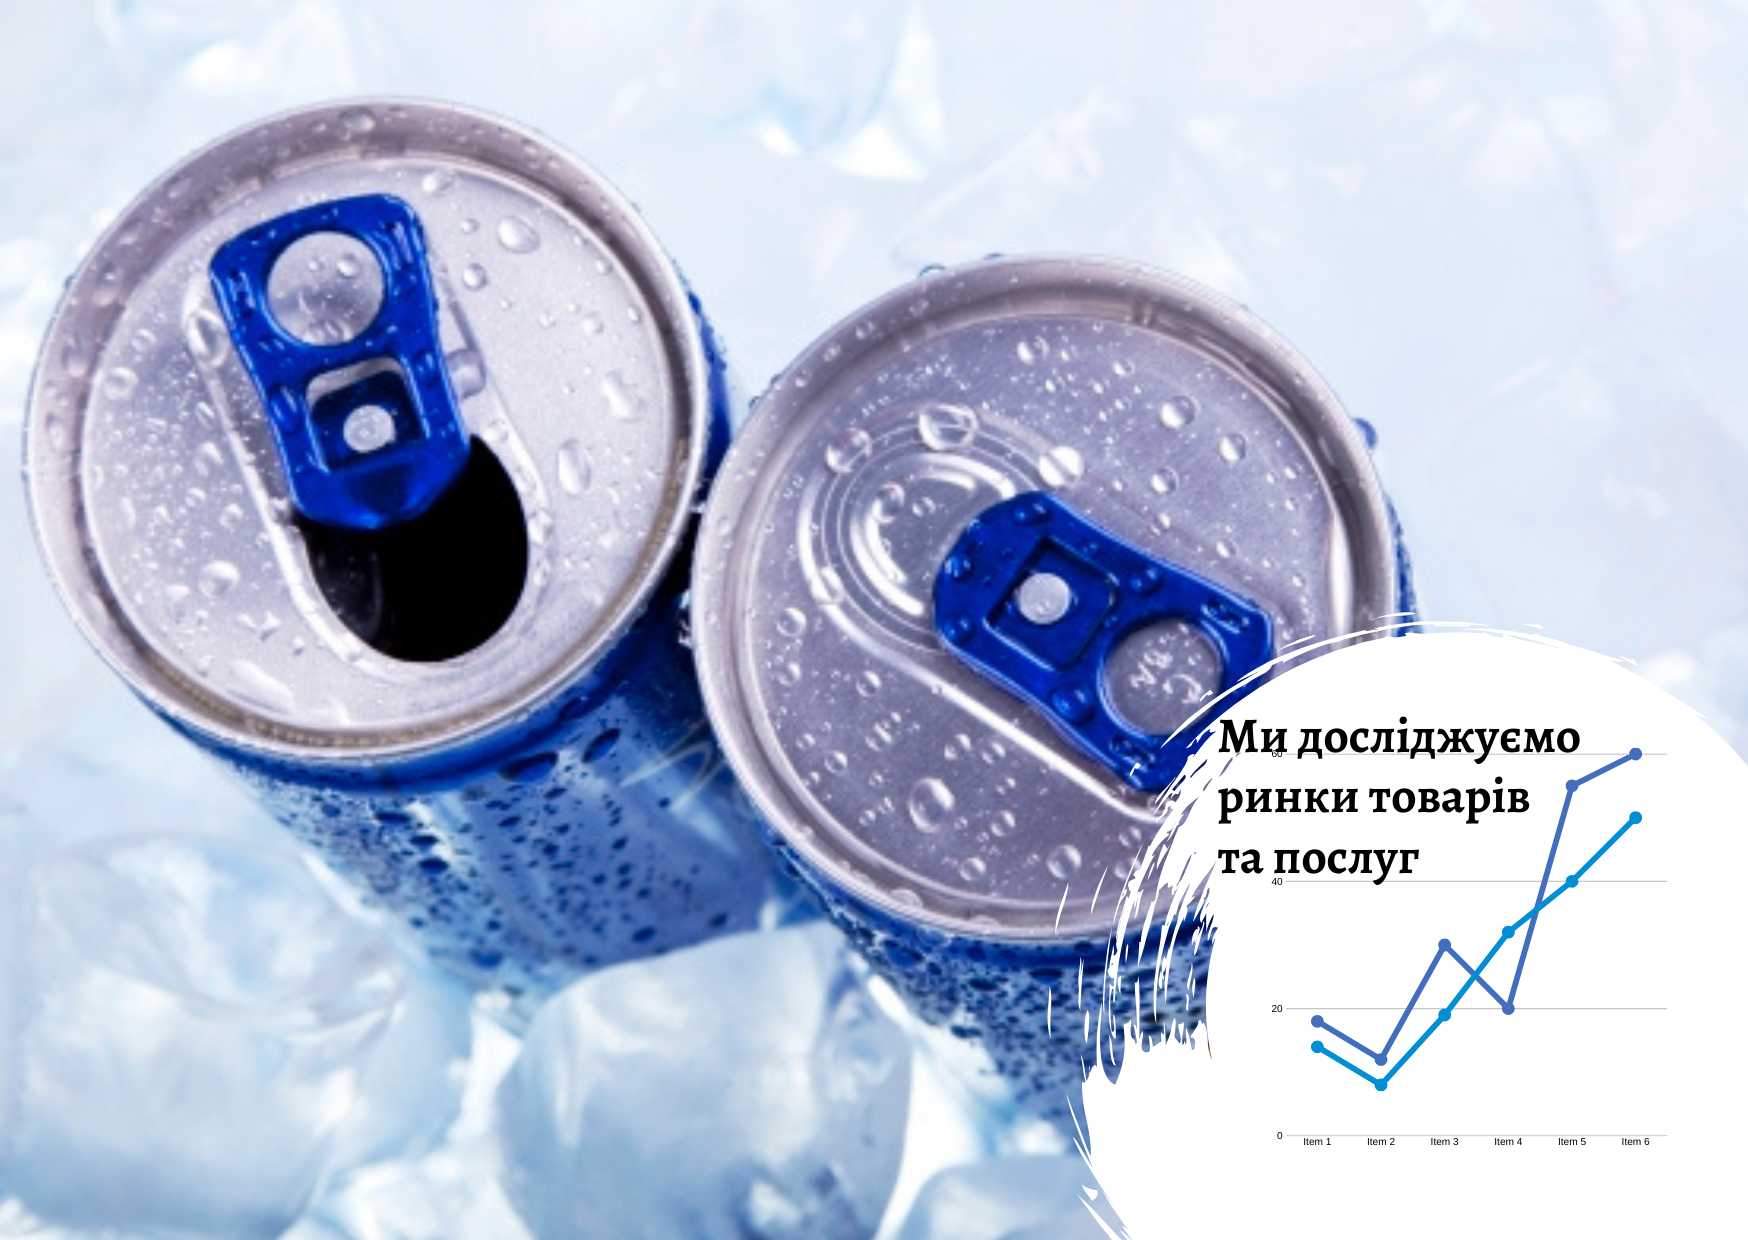 Moldovan energy and low-alcohol drinks market